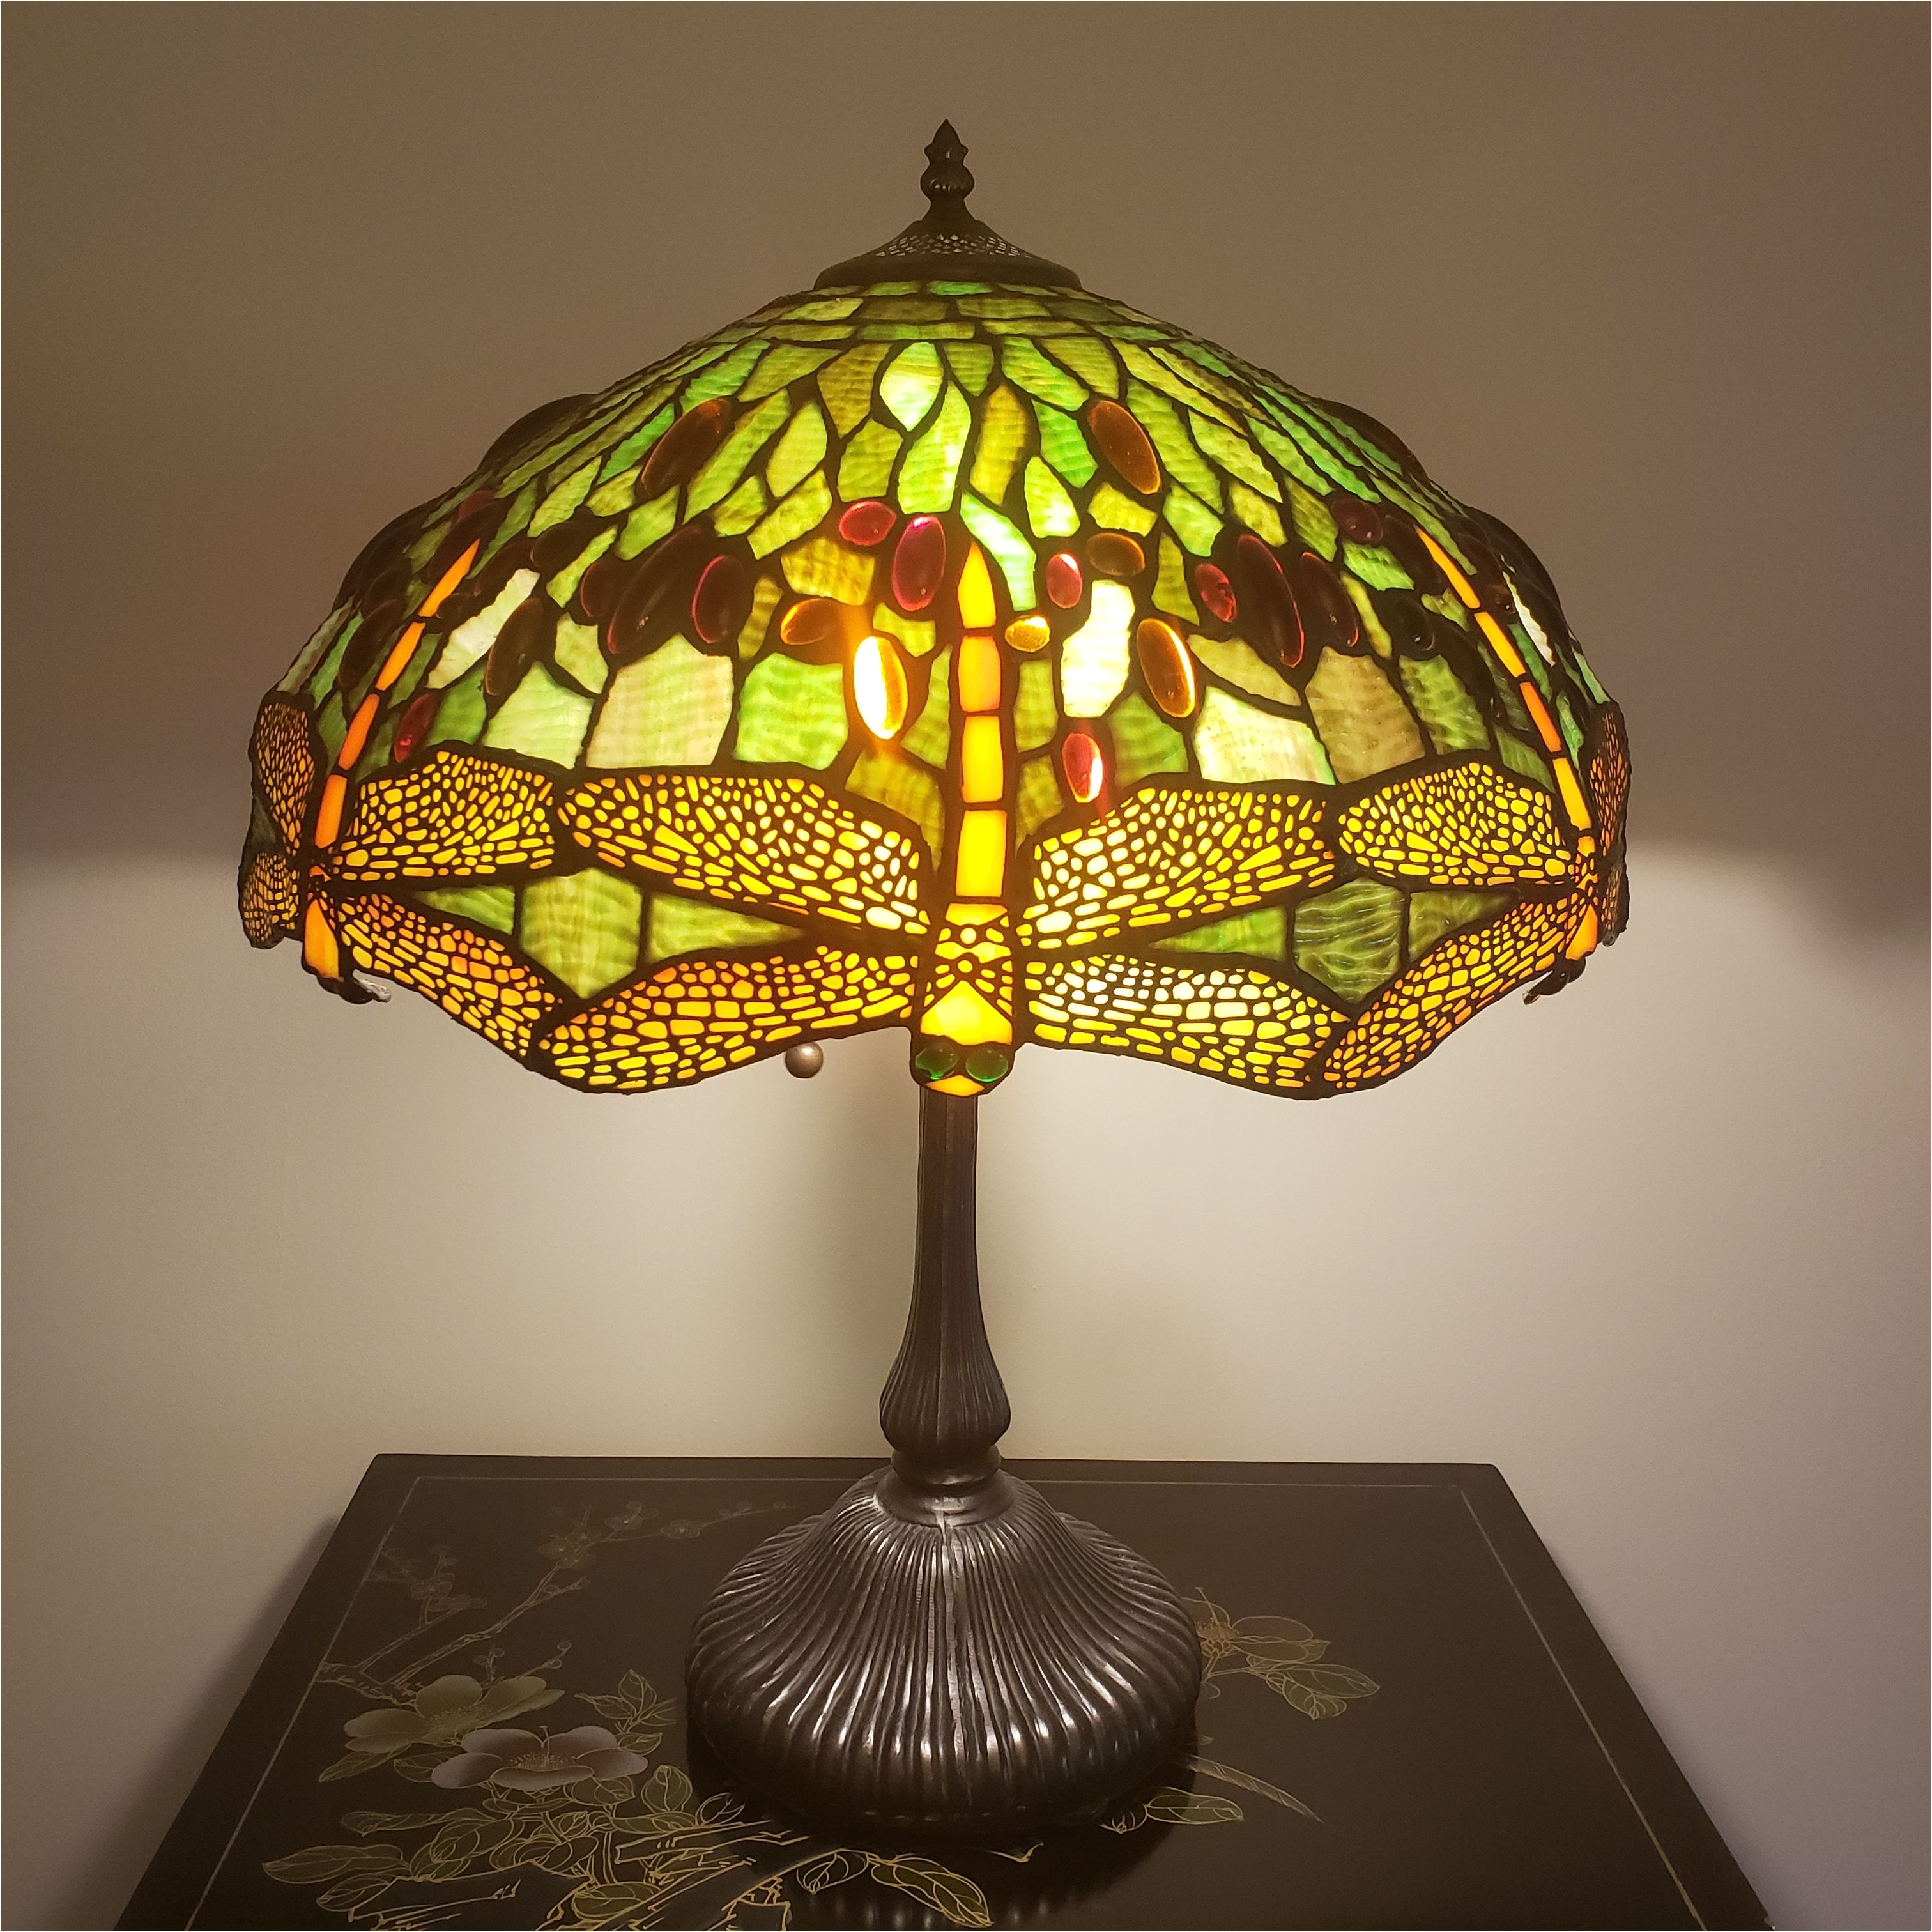 this tiffany style dragonfly lamp is part of our paoli estate sale this sunday details and a full set of photos will be posted this evening